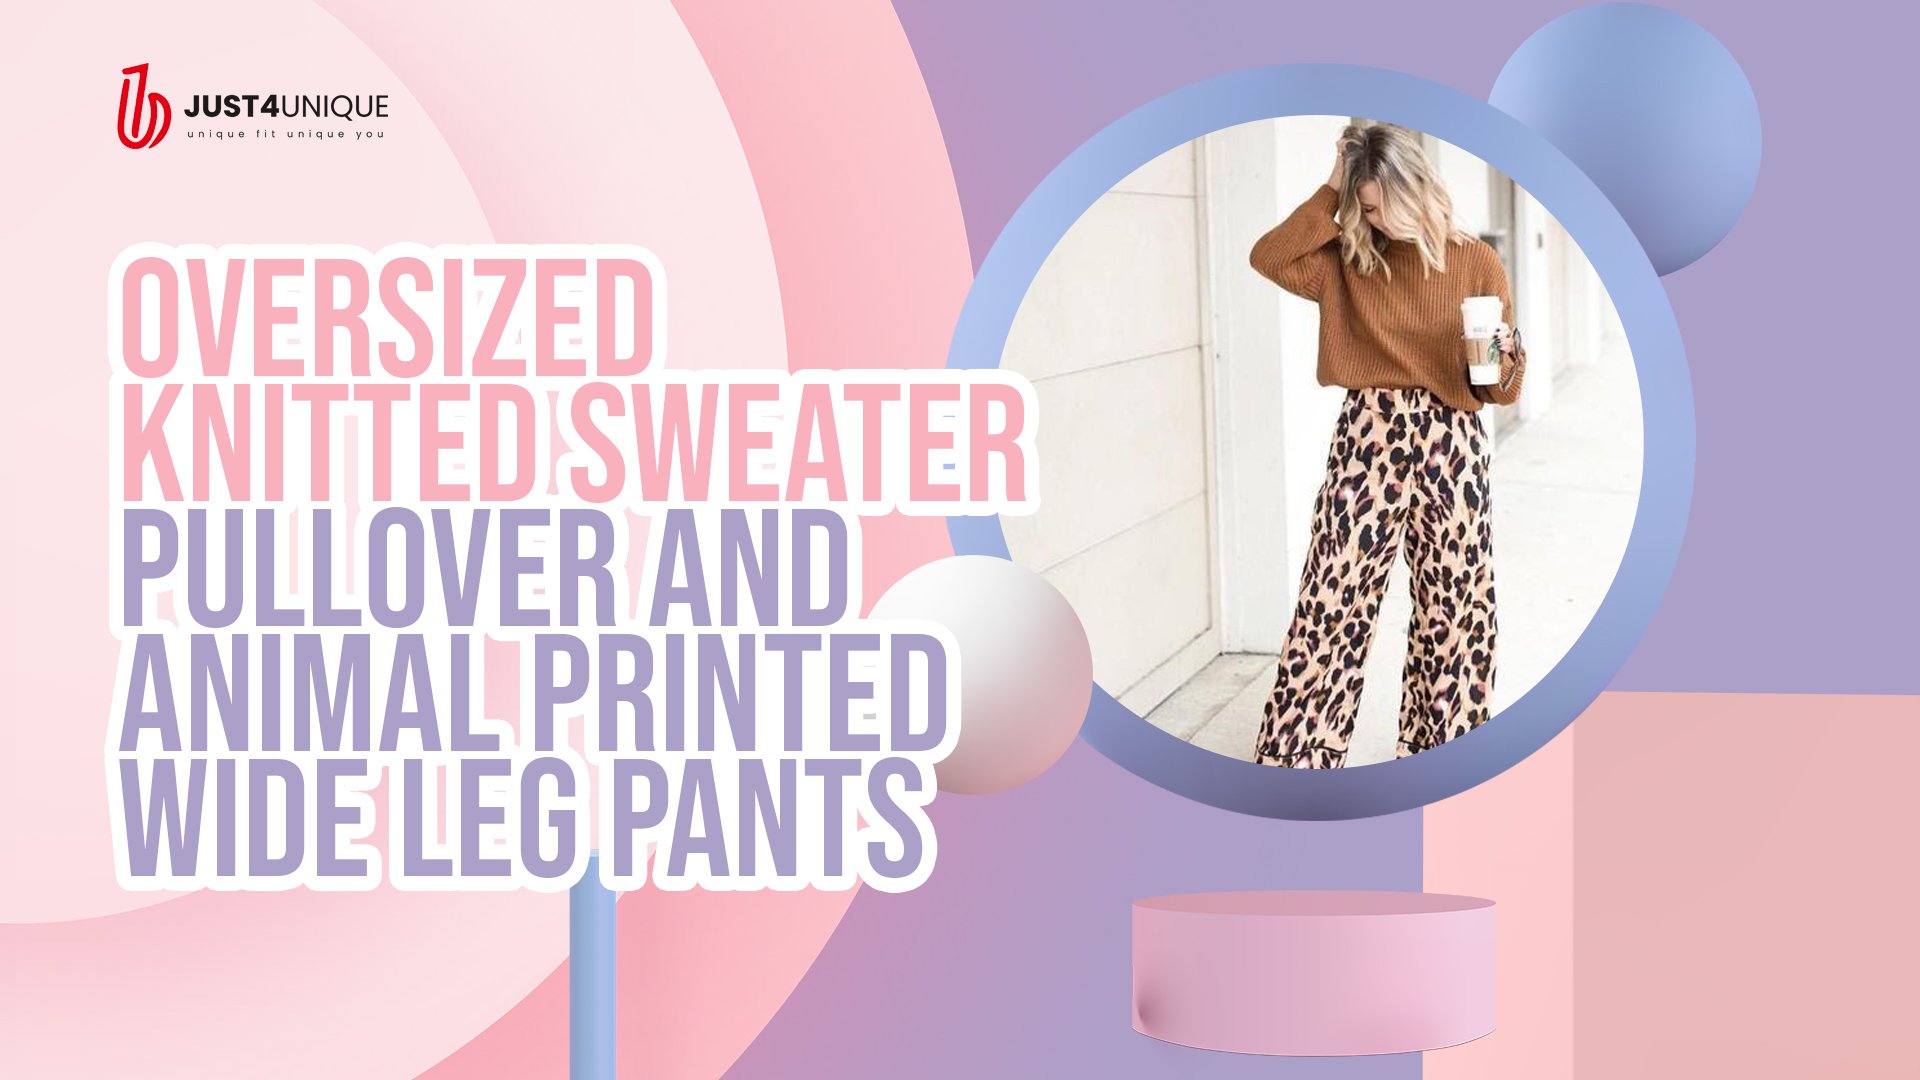 Alternative Text: A blonde woman wearing an oversized knitted sweater pullover and animal printed wide-leg pants.